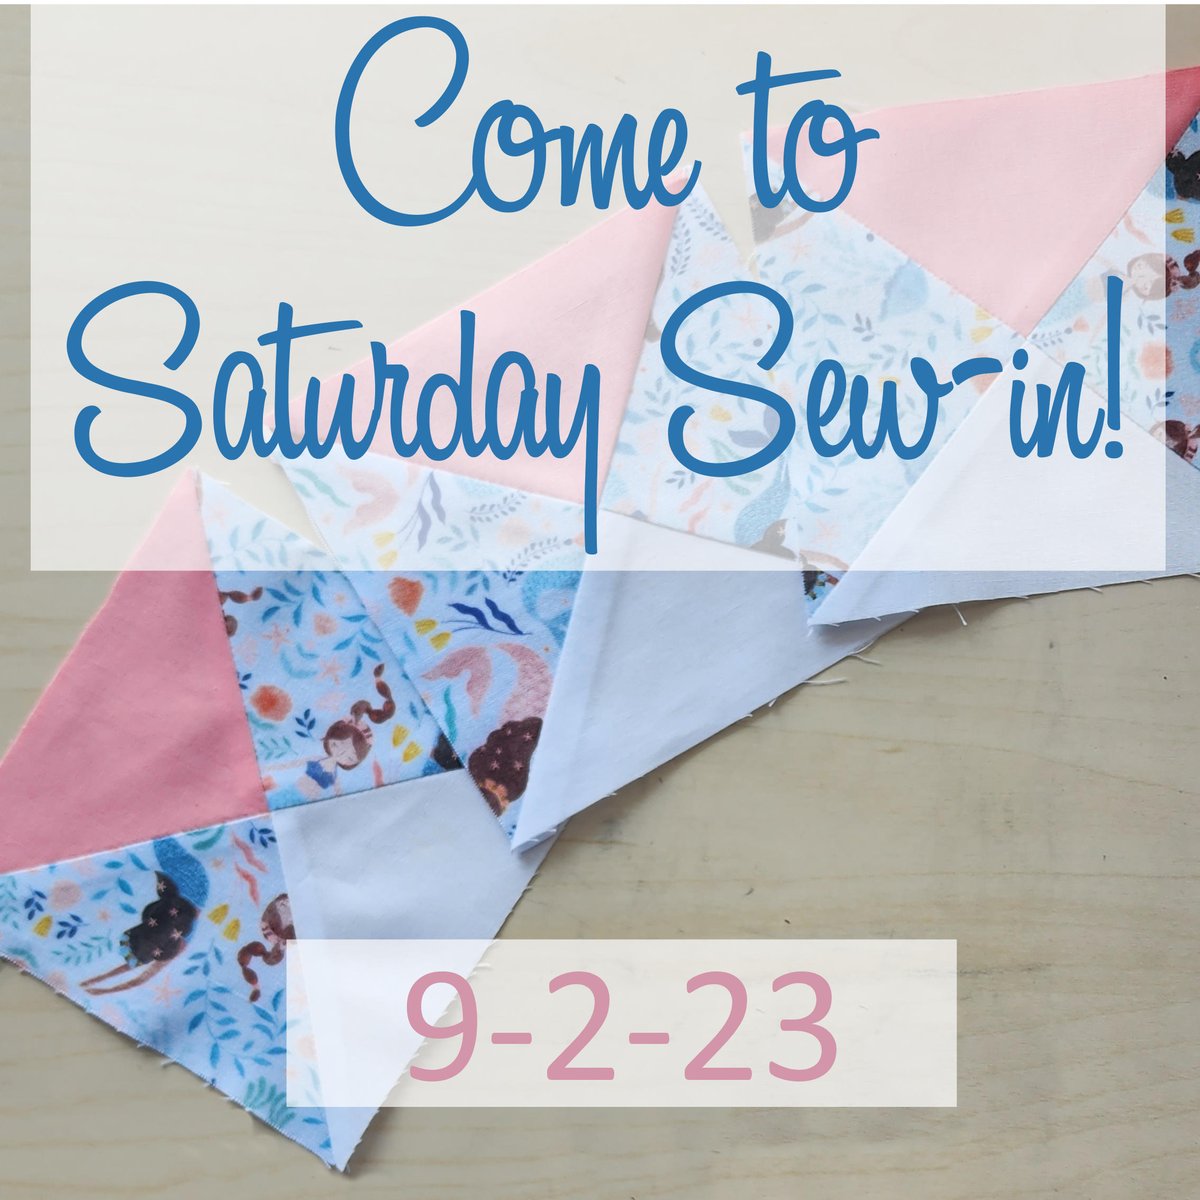 What are you working on? Today I'm celebrating my daughter's birthday! ow.ly/oBye50z3dEy #inquiringquilter #saturdaysewin #saturdaysewing